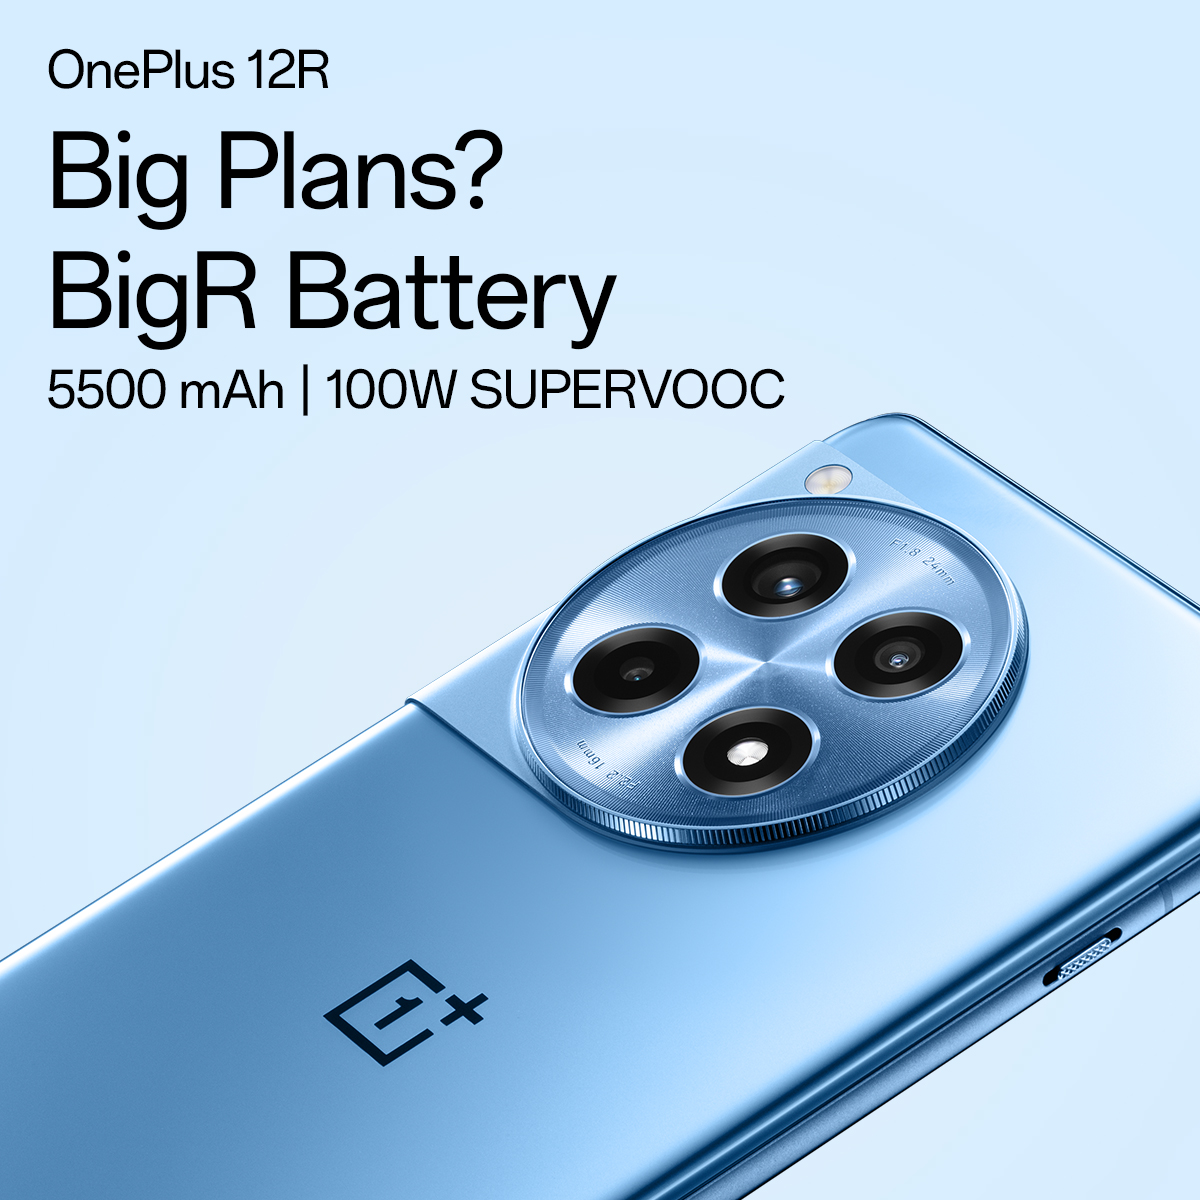 A battery life as long as your to-do-list. Experience 5500 mAh battery paired with ultra-fast 100W SUPERVOOC charging all in OnePlus 12R Get yours today: onepl.us/48cr1qg